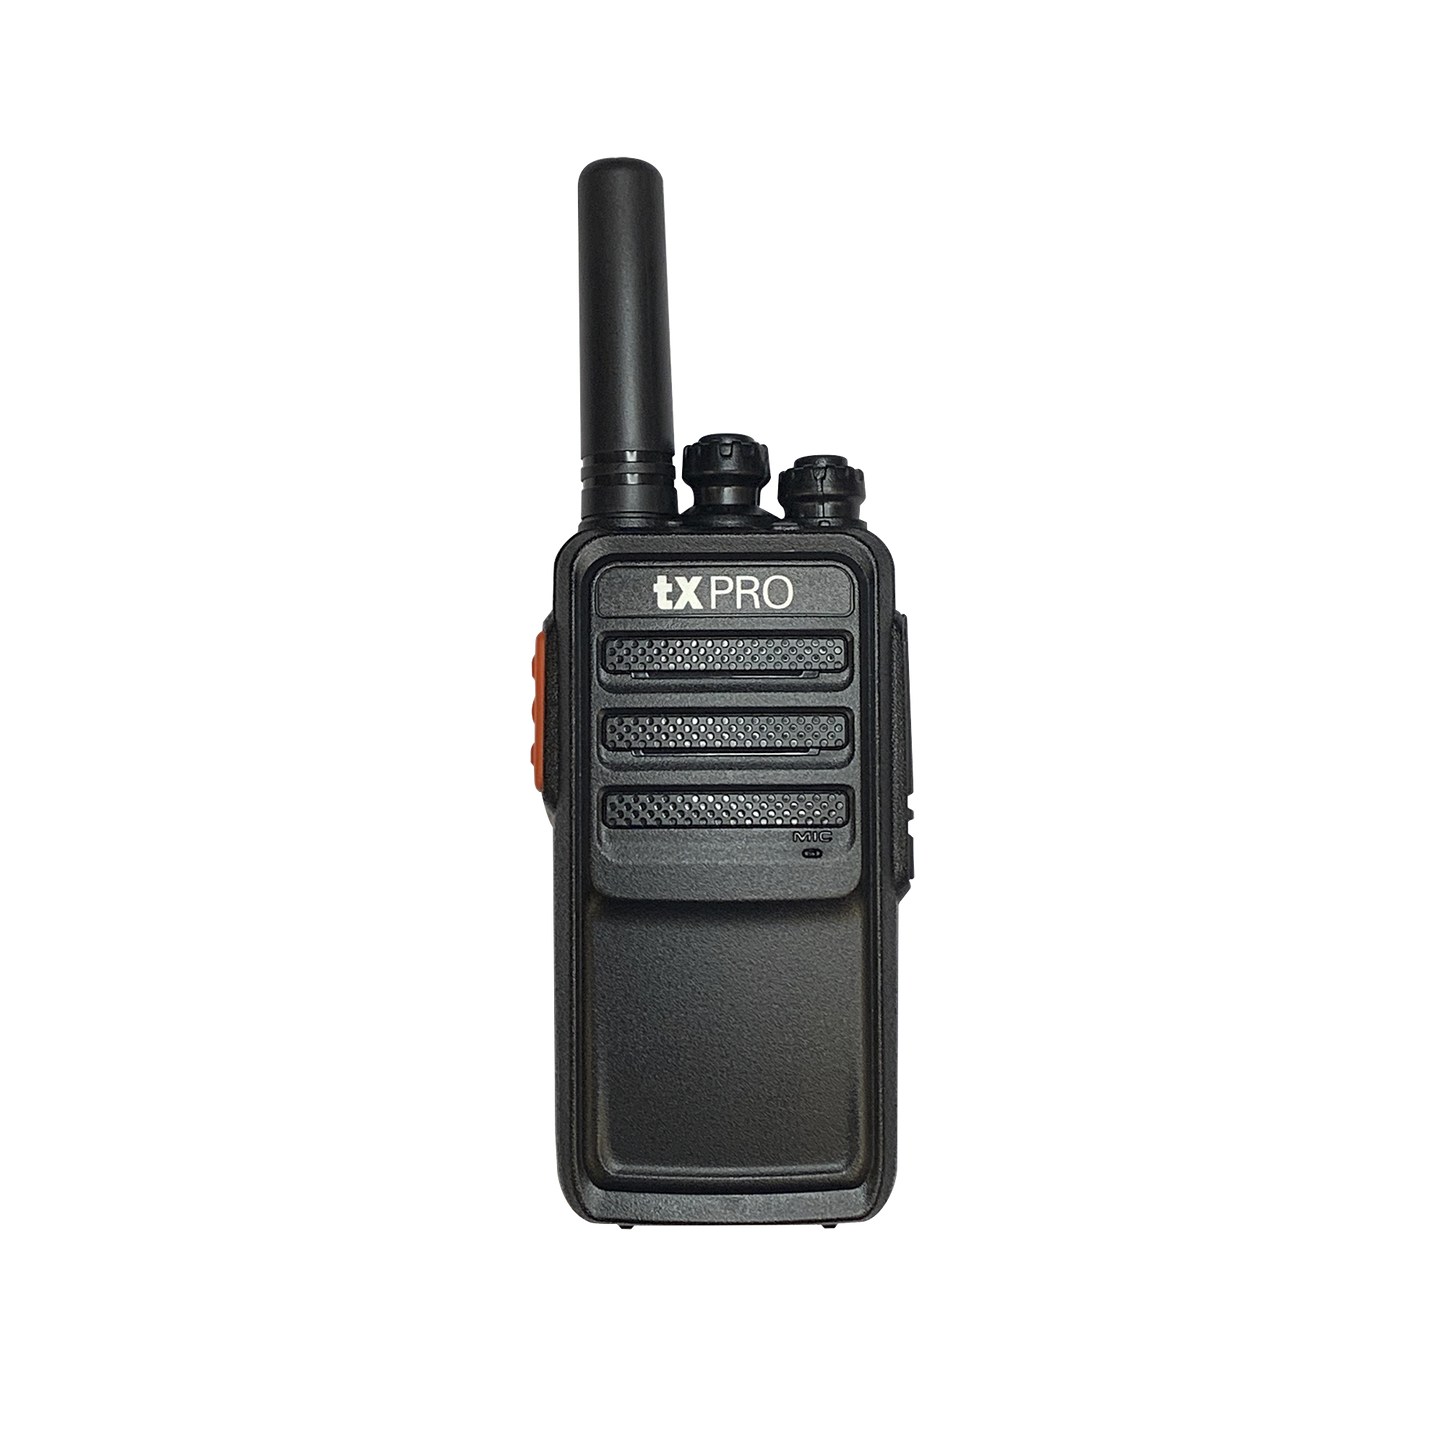 Handheld/Portable Business Two Way Radio, UHF 420-450 MHz, 16 channels